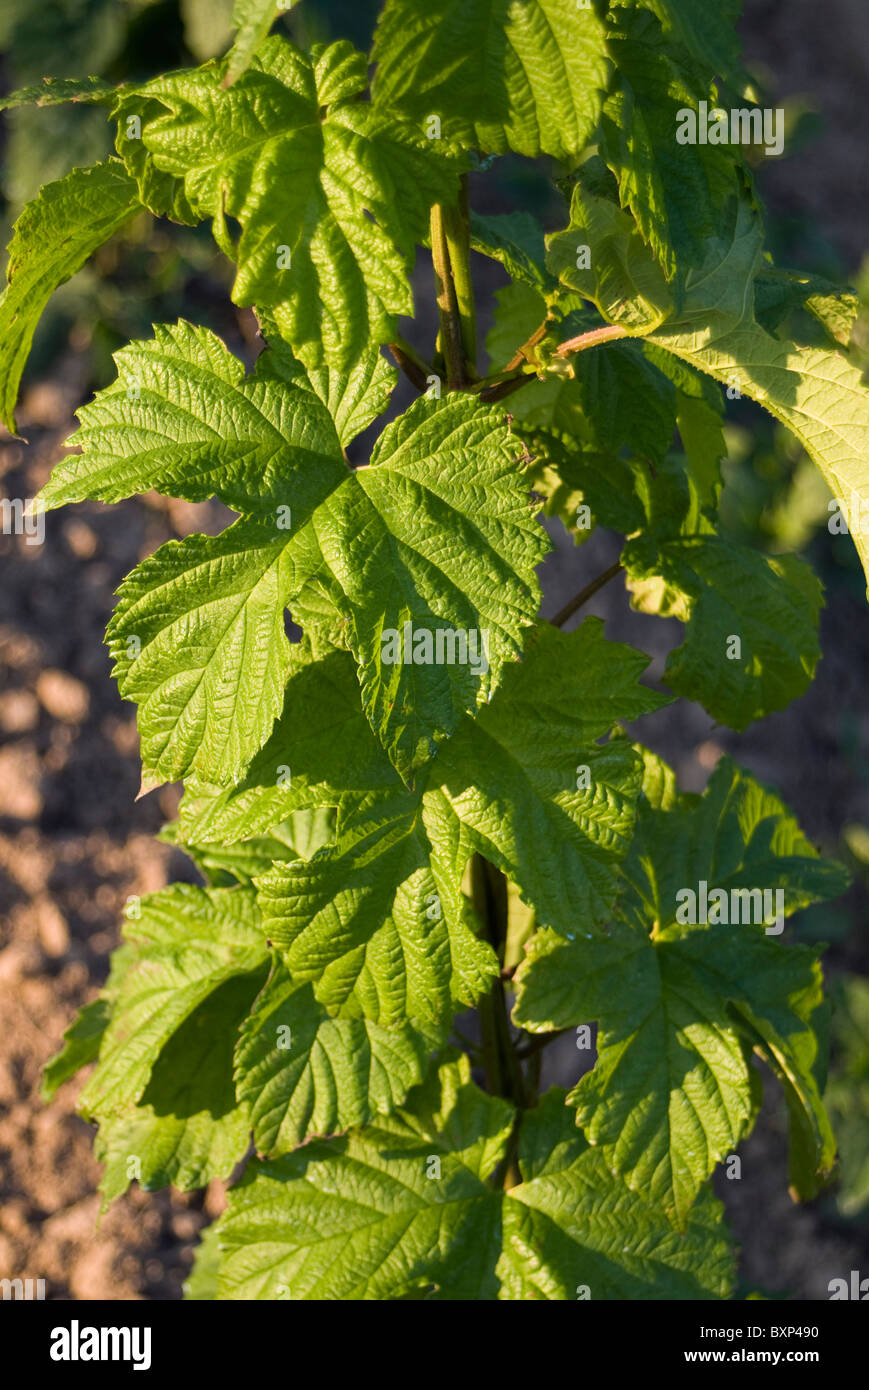 Close-up of Maturing Hops Plant (Humulus lupulus) on String, Czech Republic Stock Photo